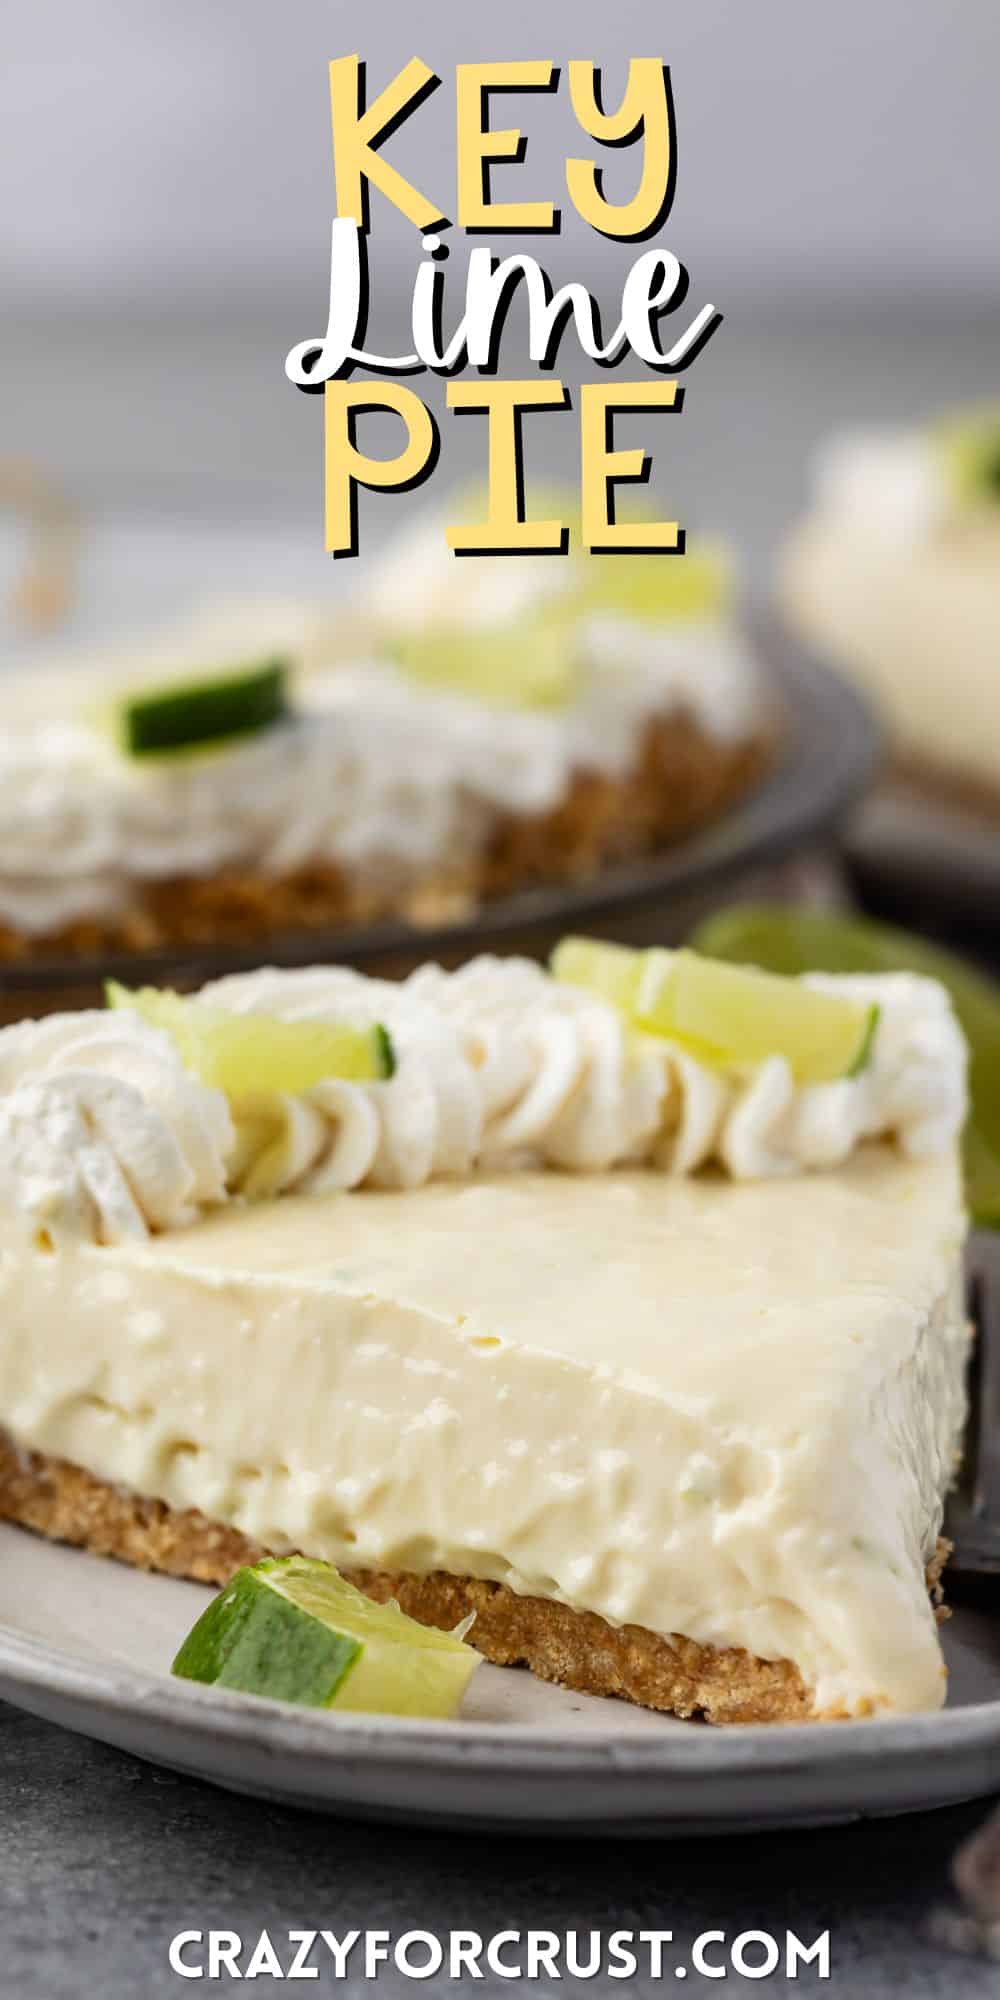 slice of key lime pie with whipped cream and sliced lime on top with words on the image.